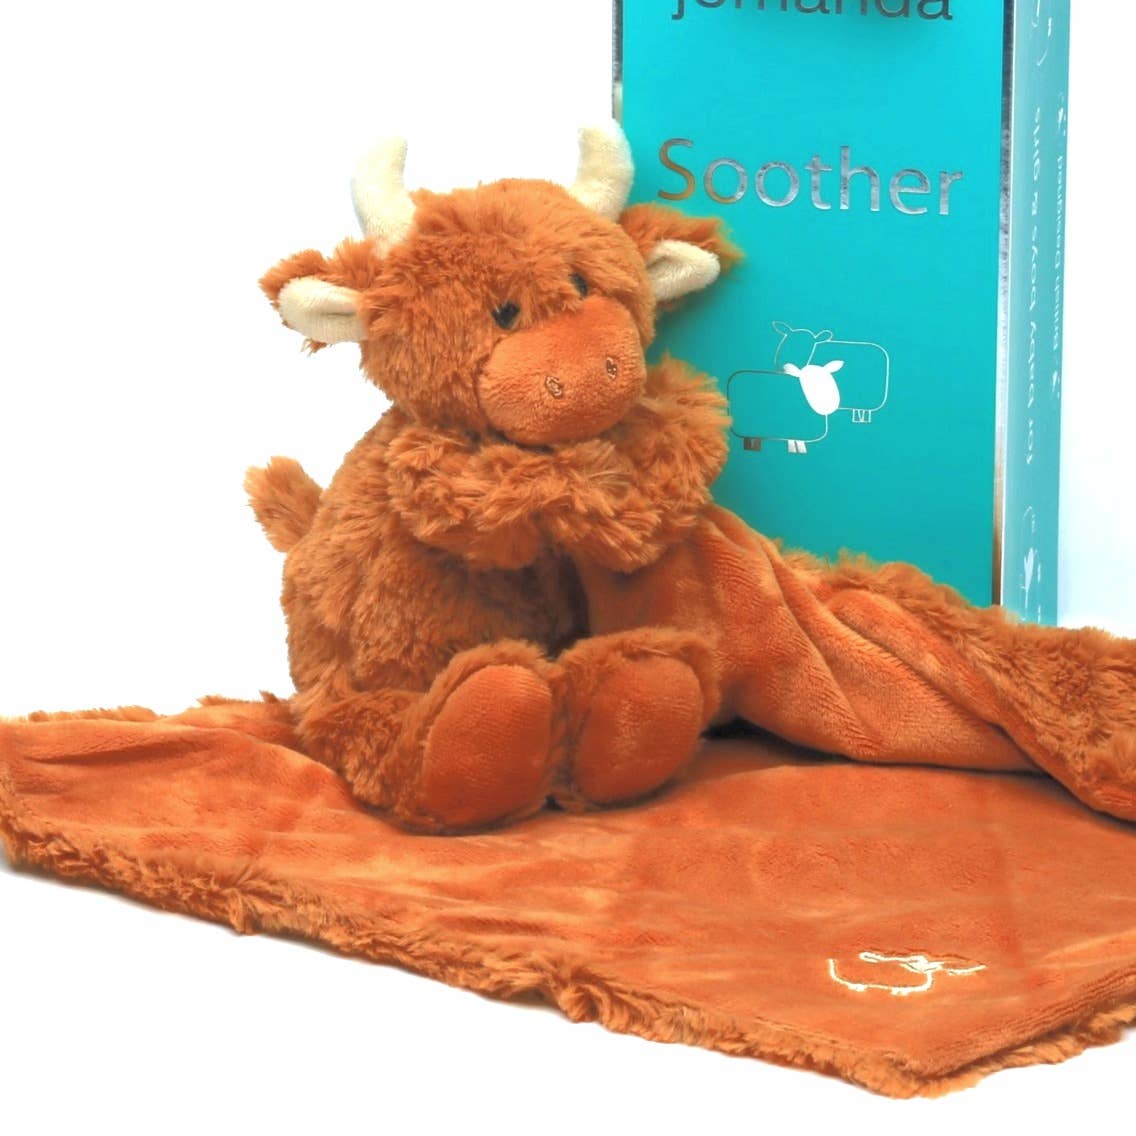 Stuffed Animals Scottish Highland Cow Super Soft Toy - Baby Blankie Soother - Brown - 11 inch x 11 inch JO-MRT30038